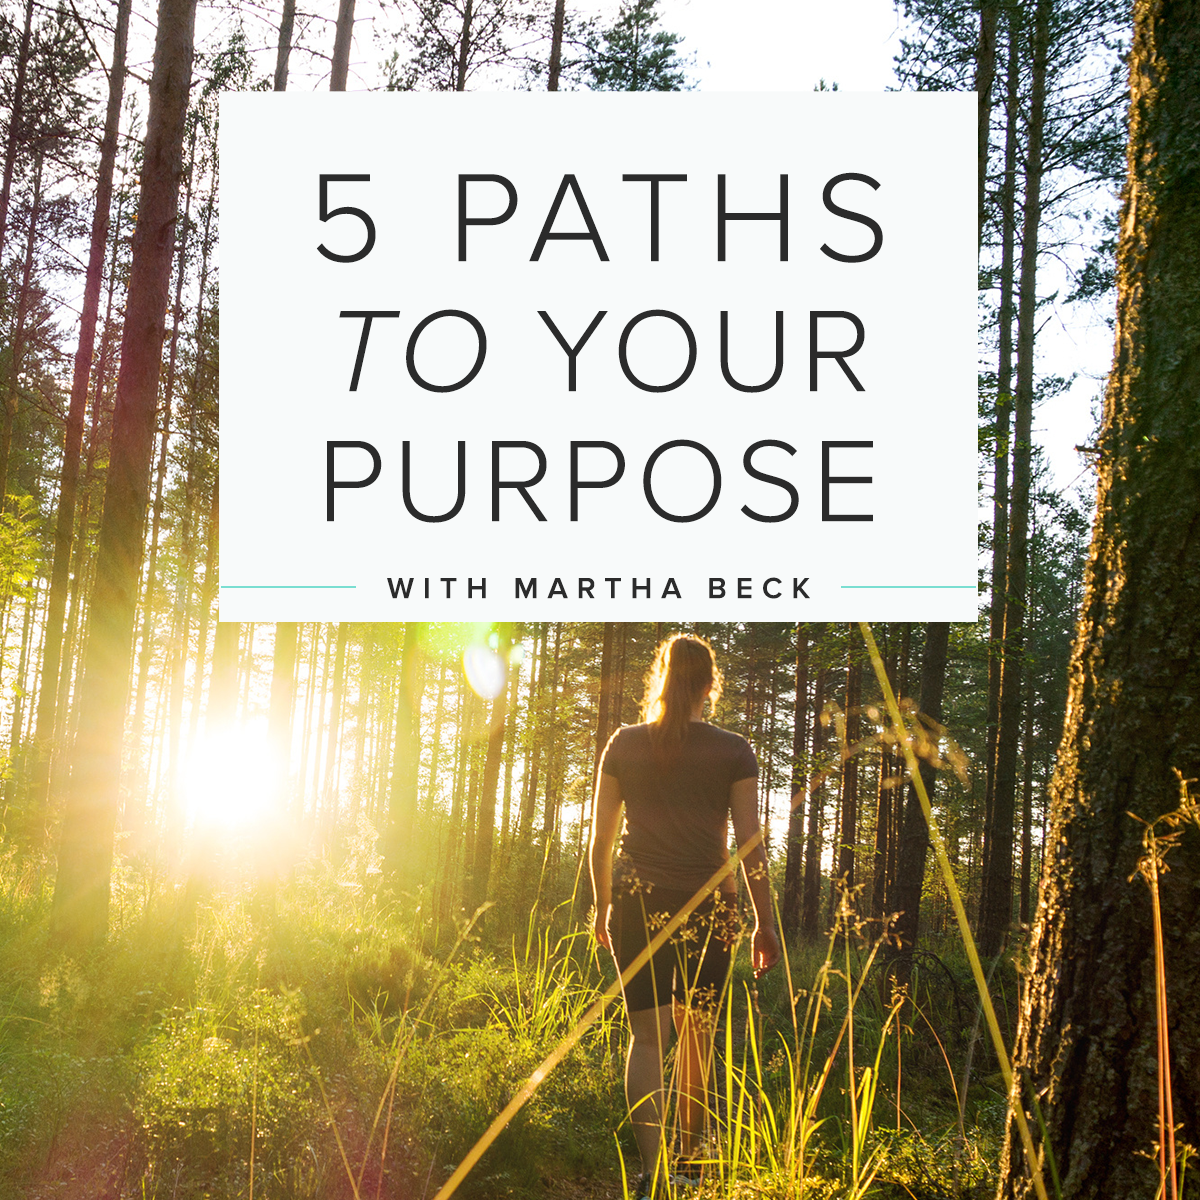 woman walking through woods at sunrise with text that says 5 Paths to Your Purpose with Martha Beck